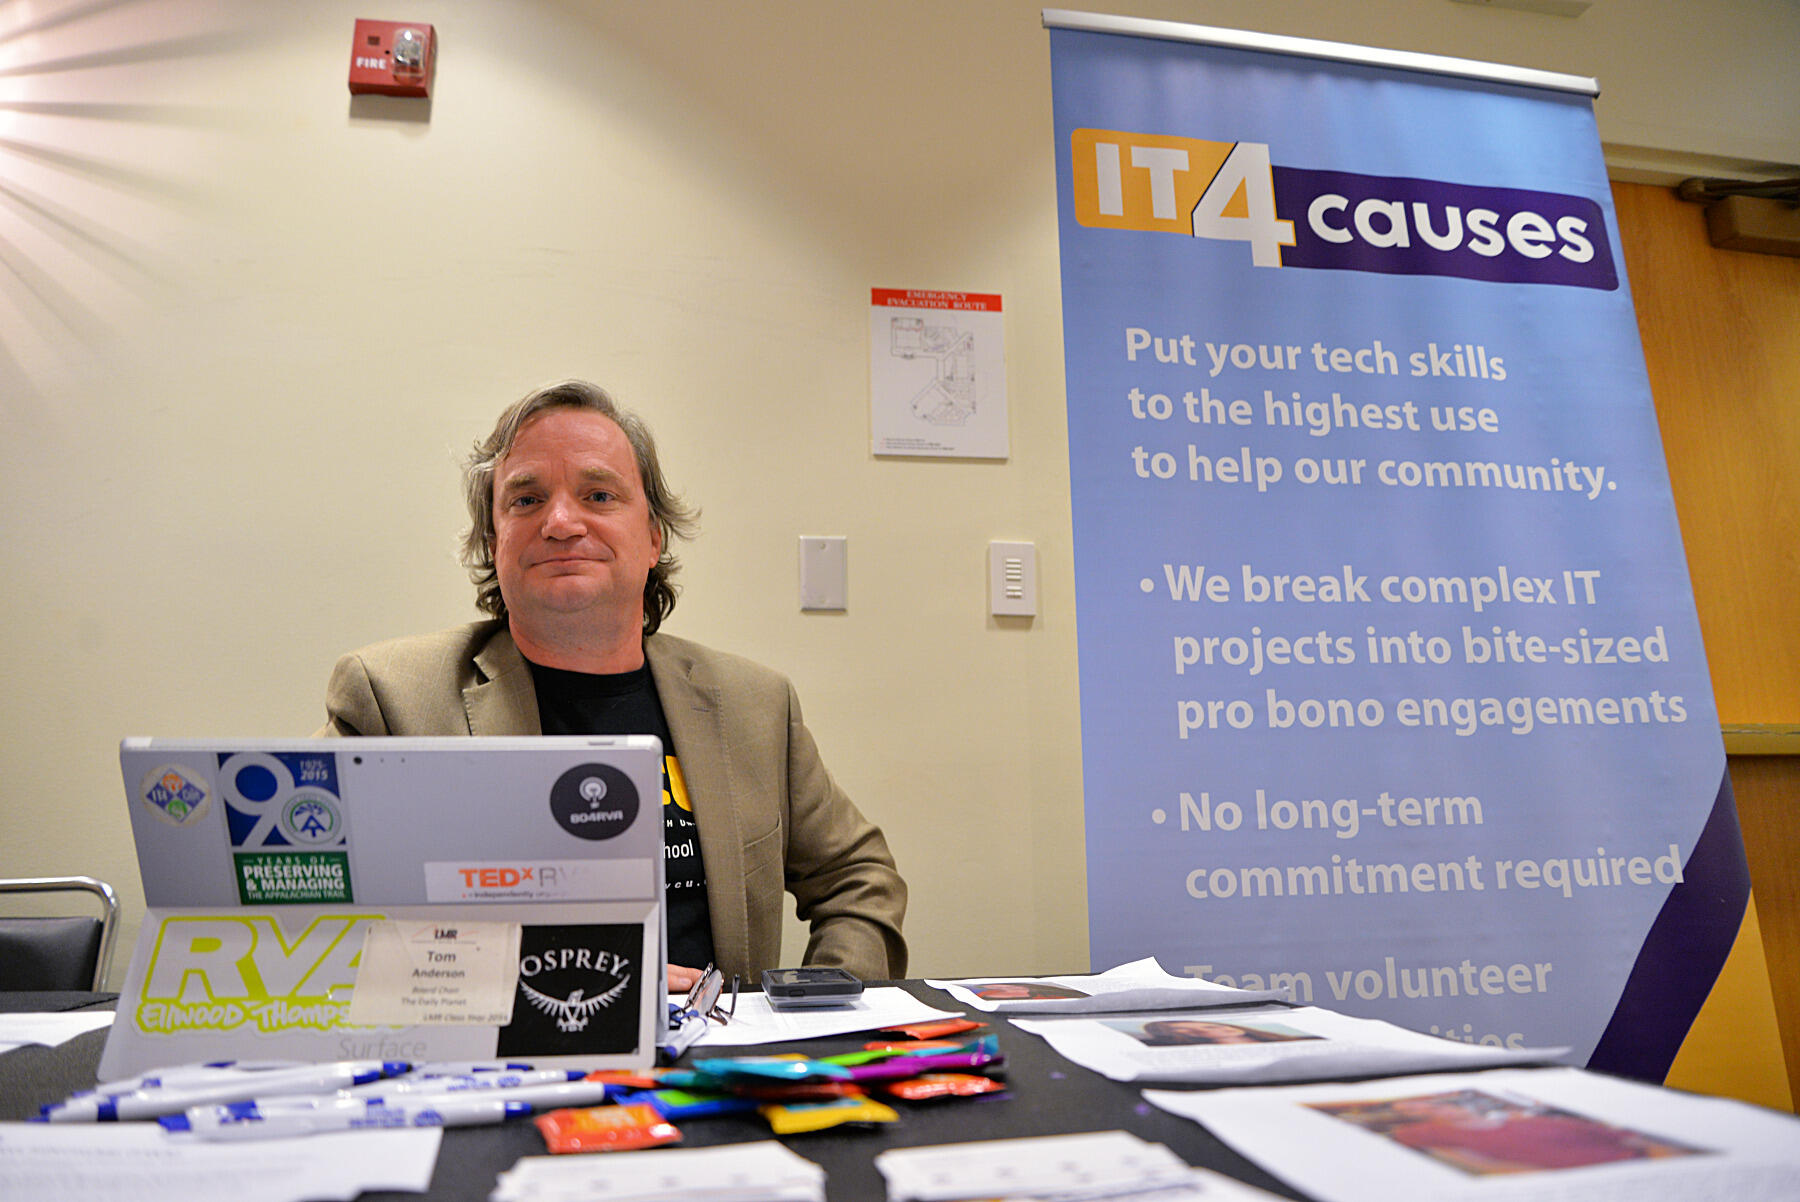 Thomas Anderson, founder of IT4Causes, recruits VCU student interns at a student worker fair in University Student Commons. The company has brought on 10 VCU students as interns, including seven this fall. Photo by Brian McNeill, University Public Affairs.